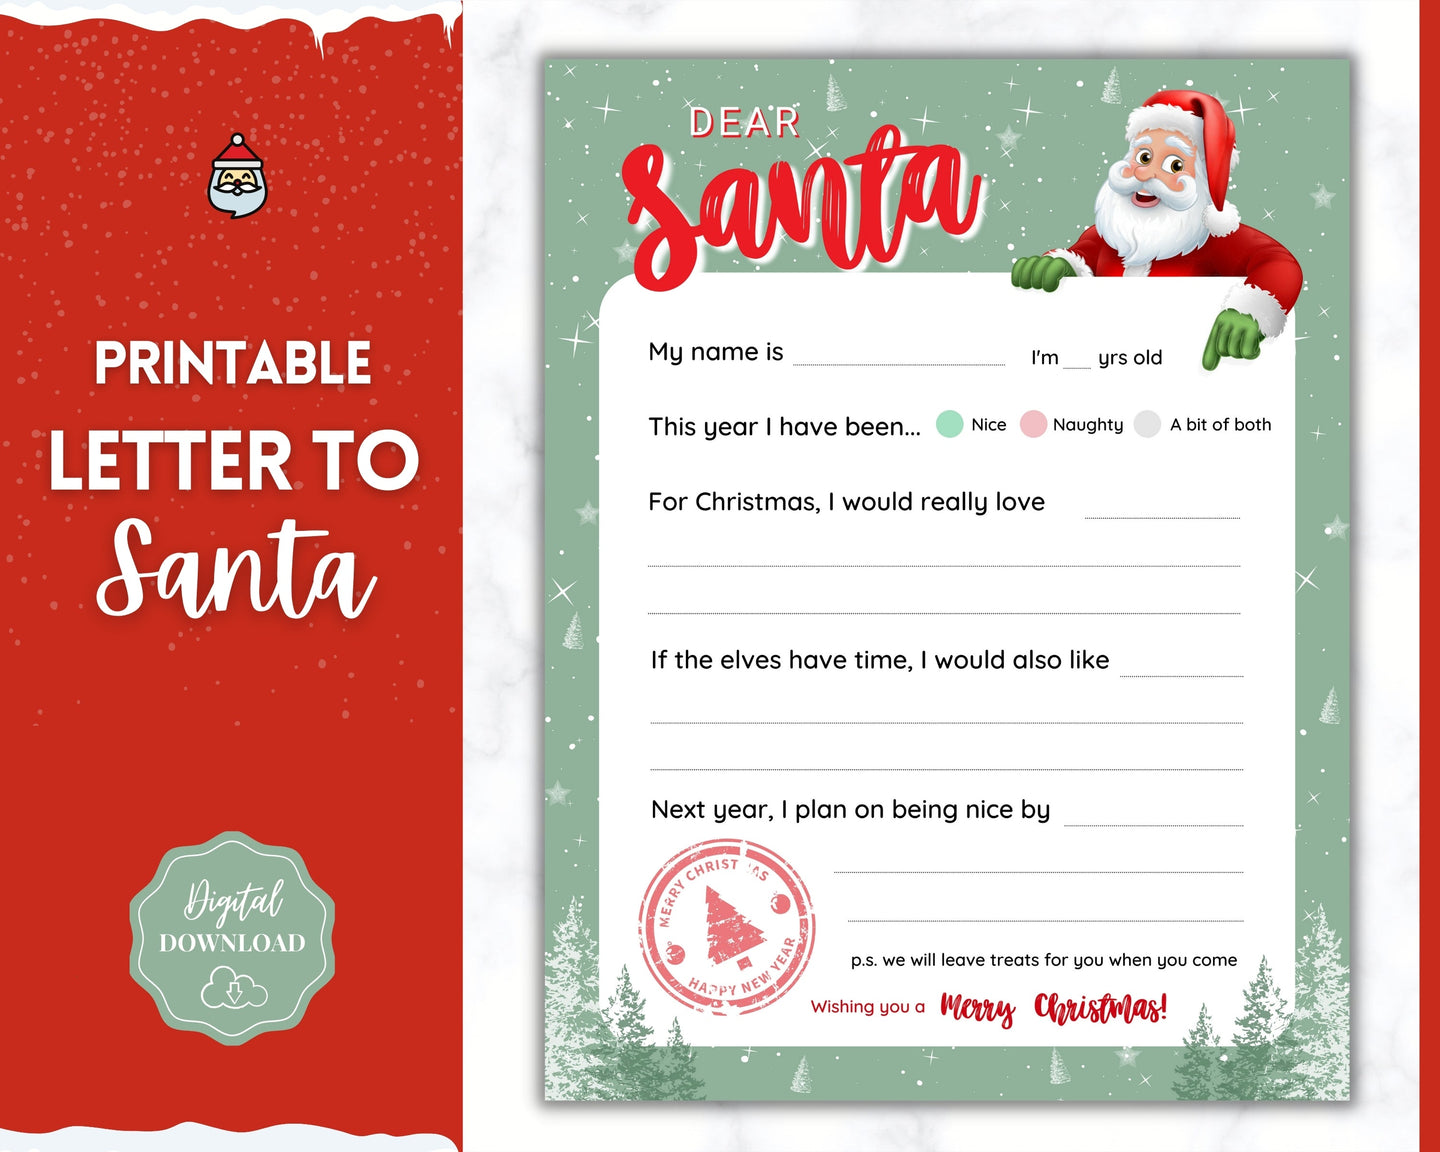 Letter to Santa Claus, SAGE Kids Christmas Wish List Printable, Father Christmas Letter, Dear Santa Letter, Holidays, North Pole Mail, Nice List